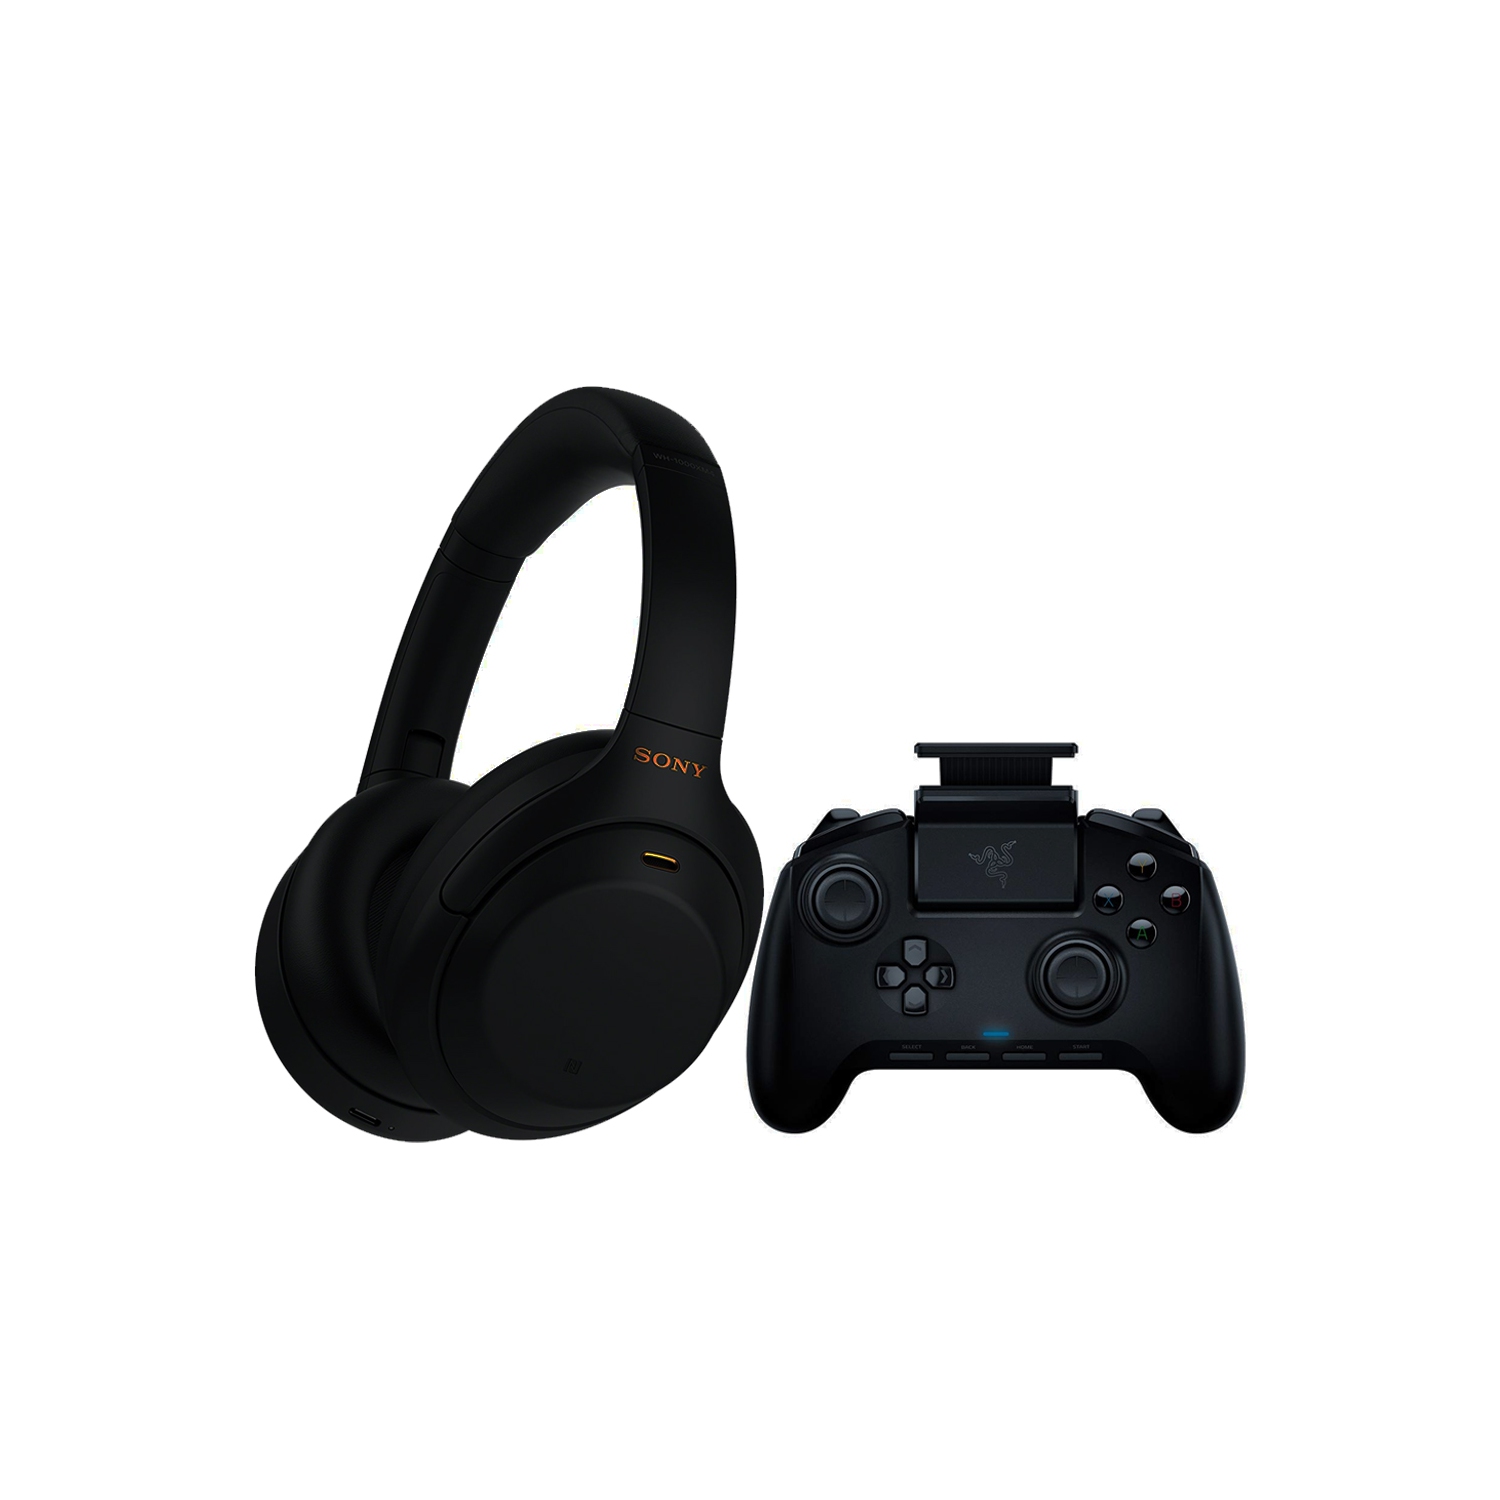 Sony WH-1000XM4 Wireless Noise Canceling Over-the-Ear Headphones with Google Assistant and Alexa + Razer Raiju Mobile: Ergonomic Mobile Gaming Controller for Android